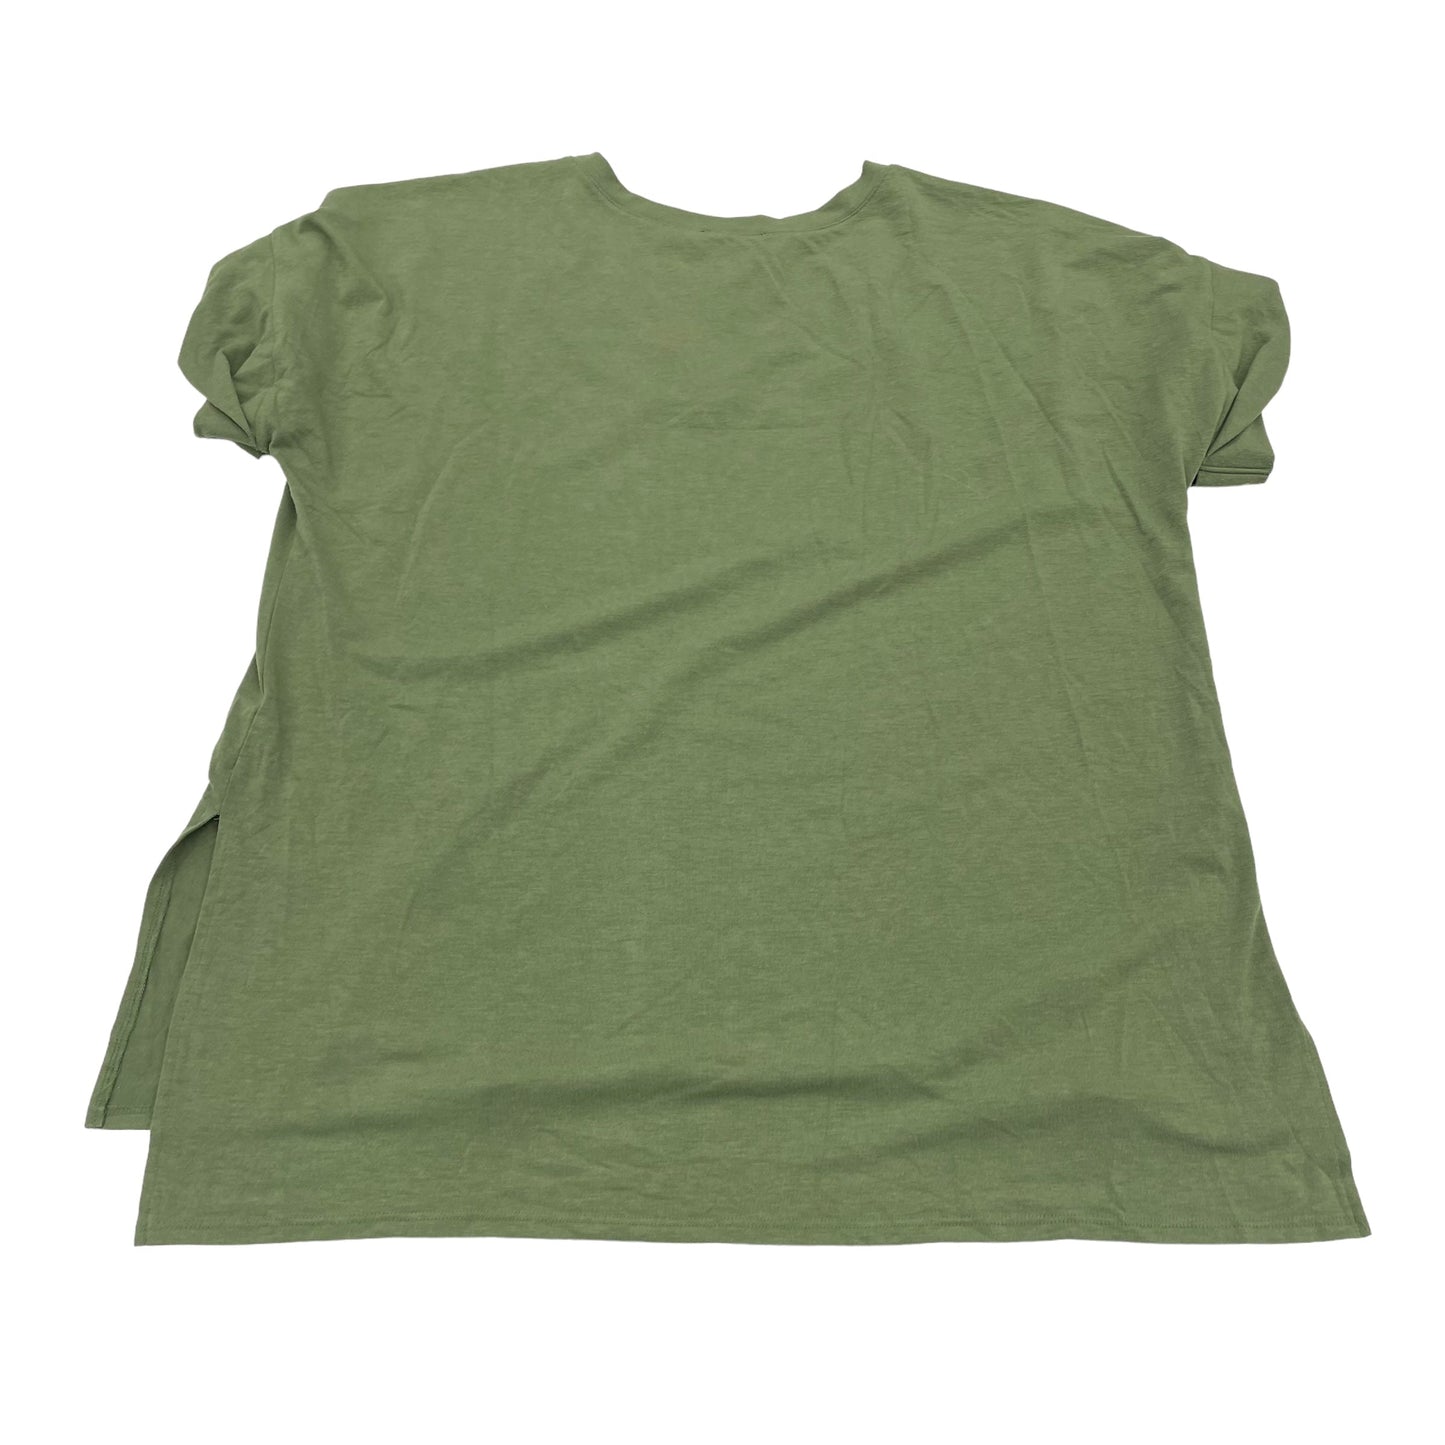 Green Top Short Sleeve Zenana Outfitters, Size 2x